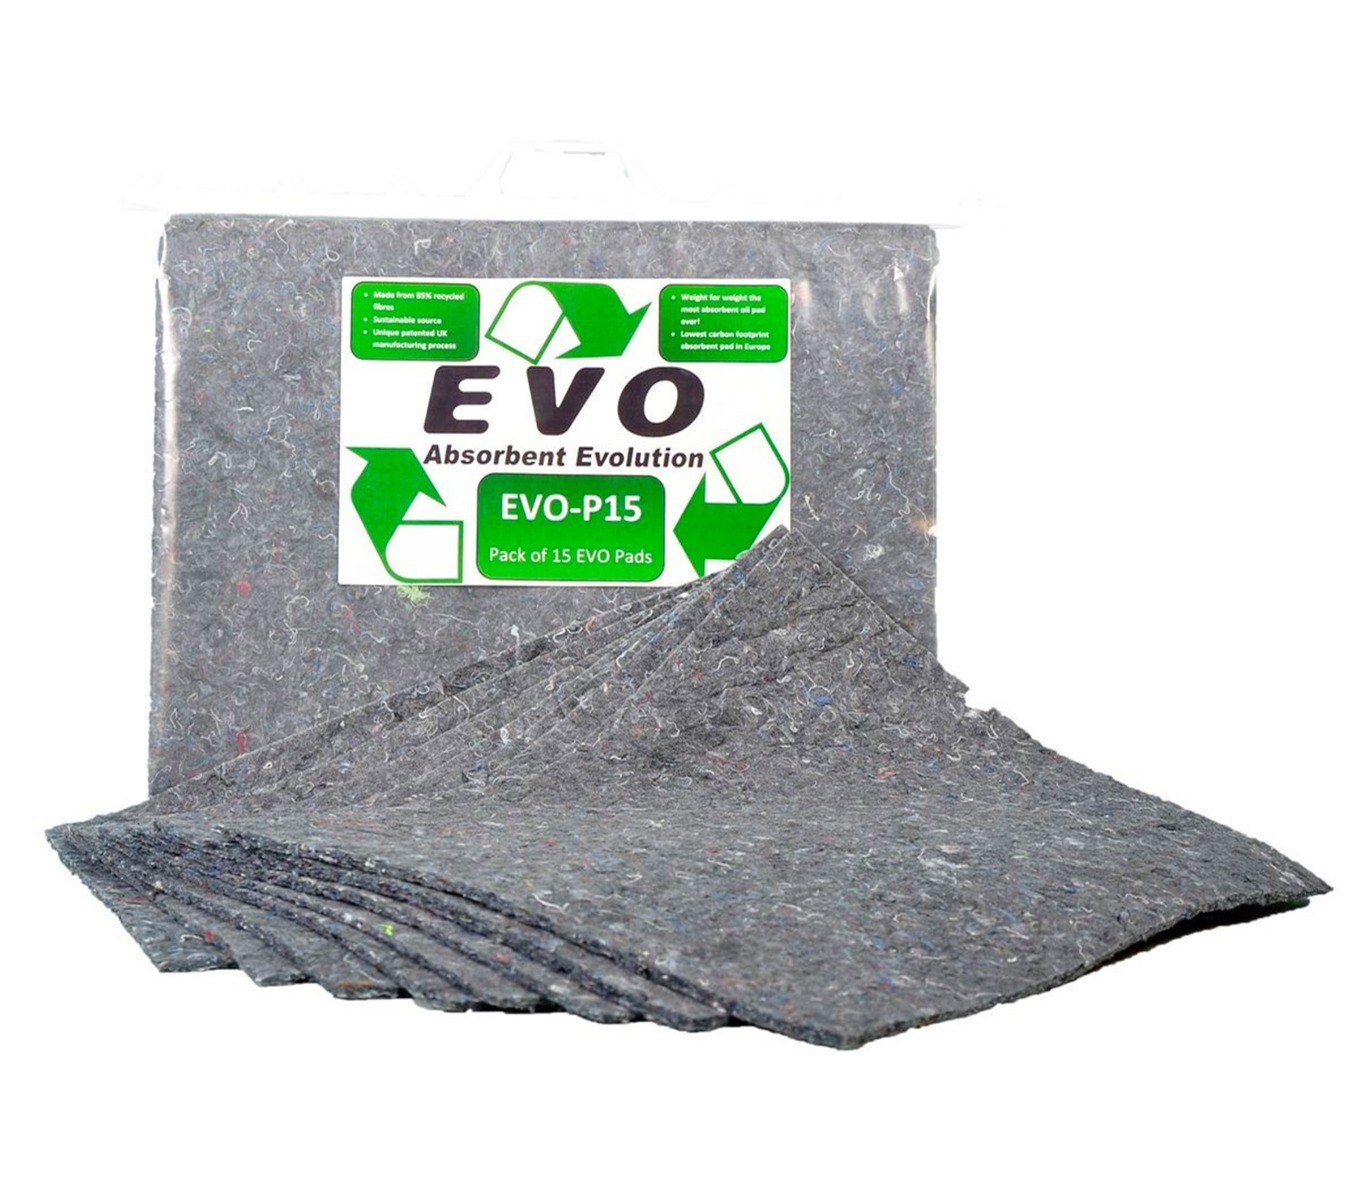 EVO Absorbent Pads - Absorbs 22.5L - Clip-Top Bag Pack of 15